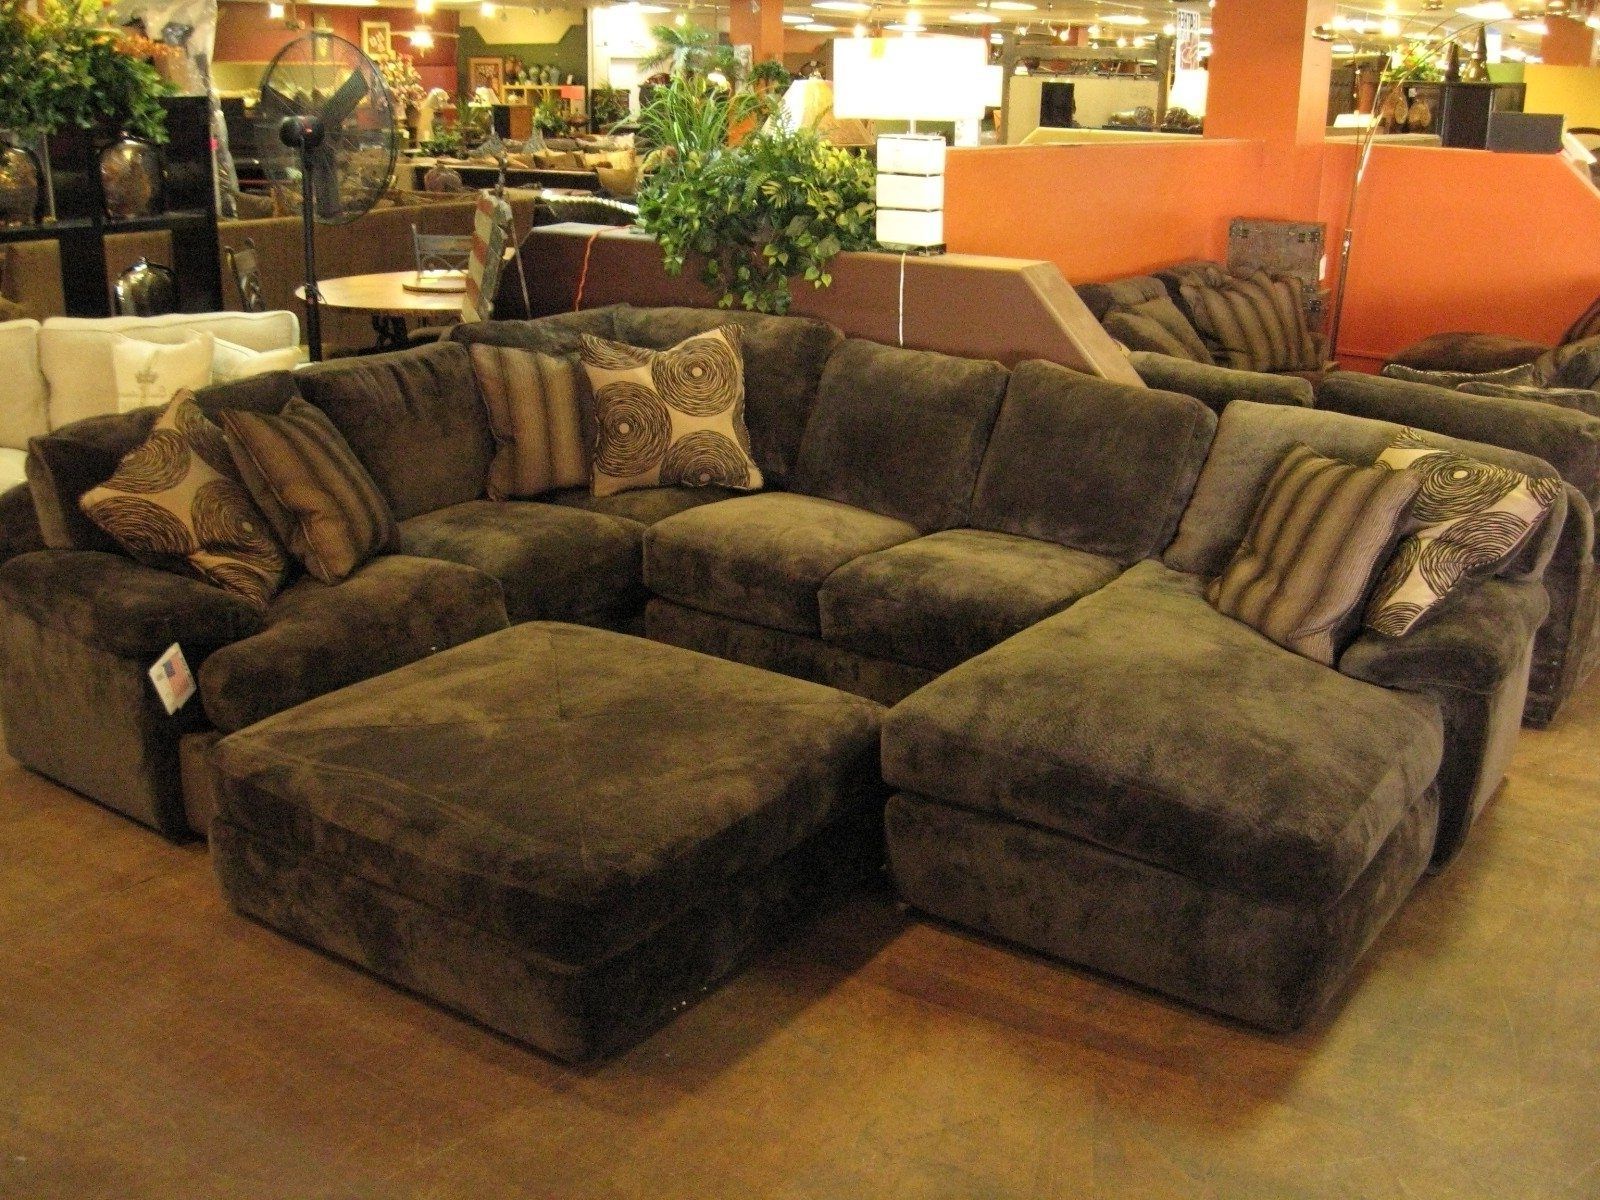 Sofa : Magnificent Large Sectional Sofa With Chaise Reclining Inside Fashionable Sectionals With Chaise And Ottoman (View 2 of 20)